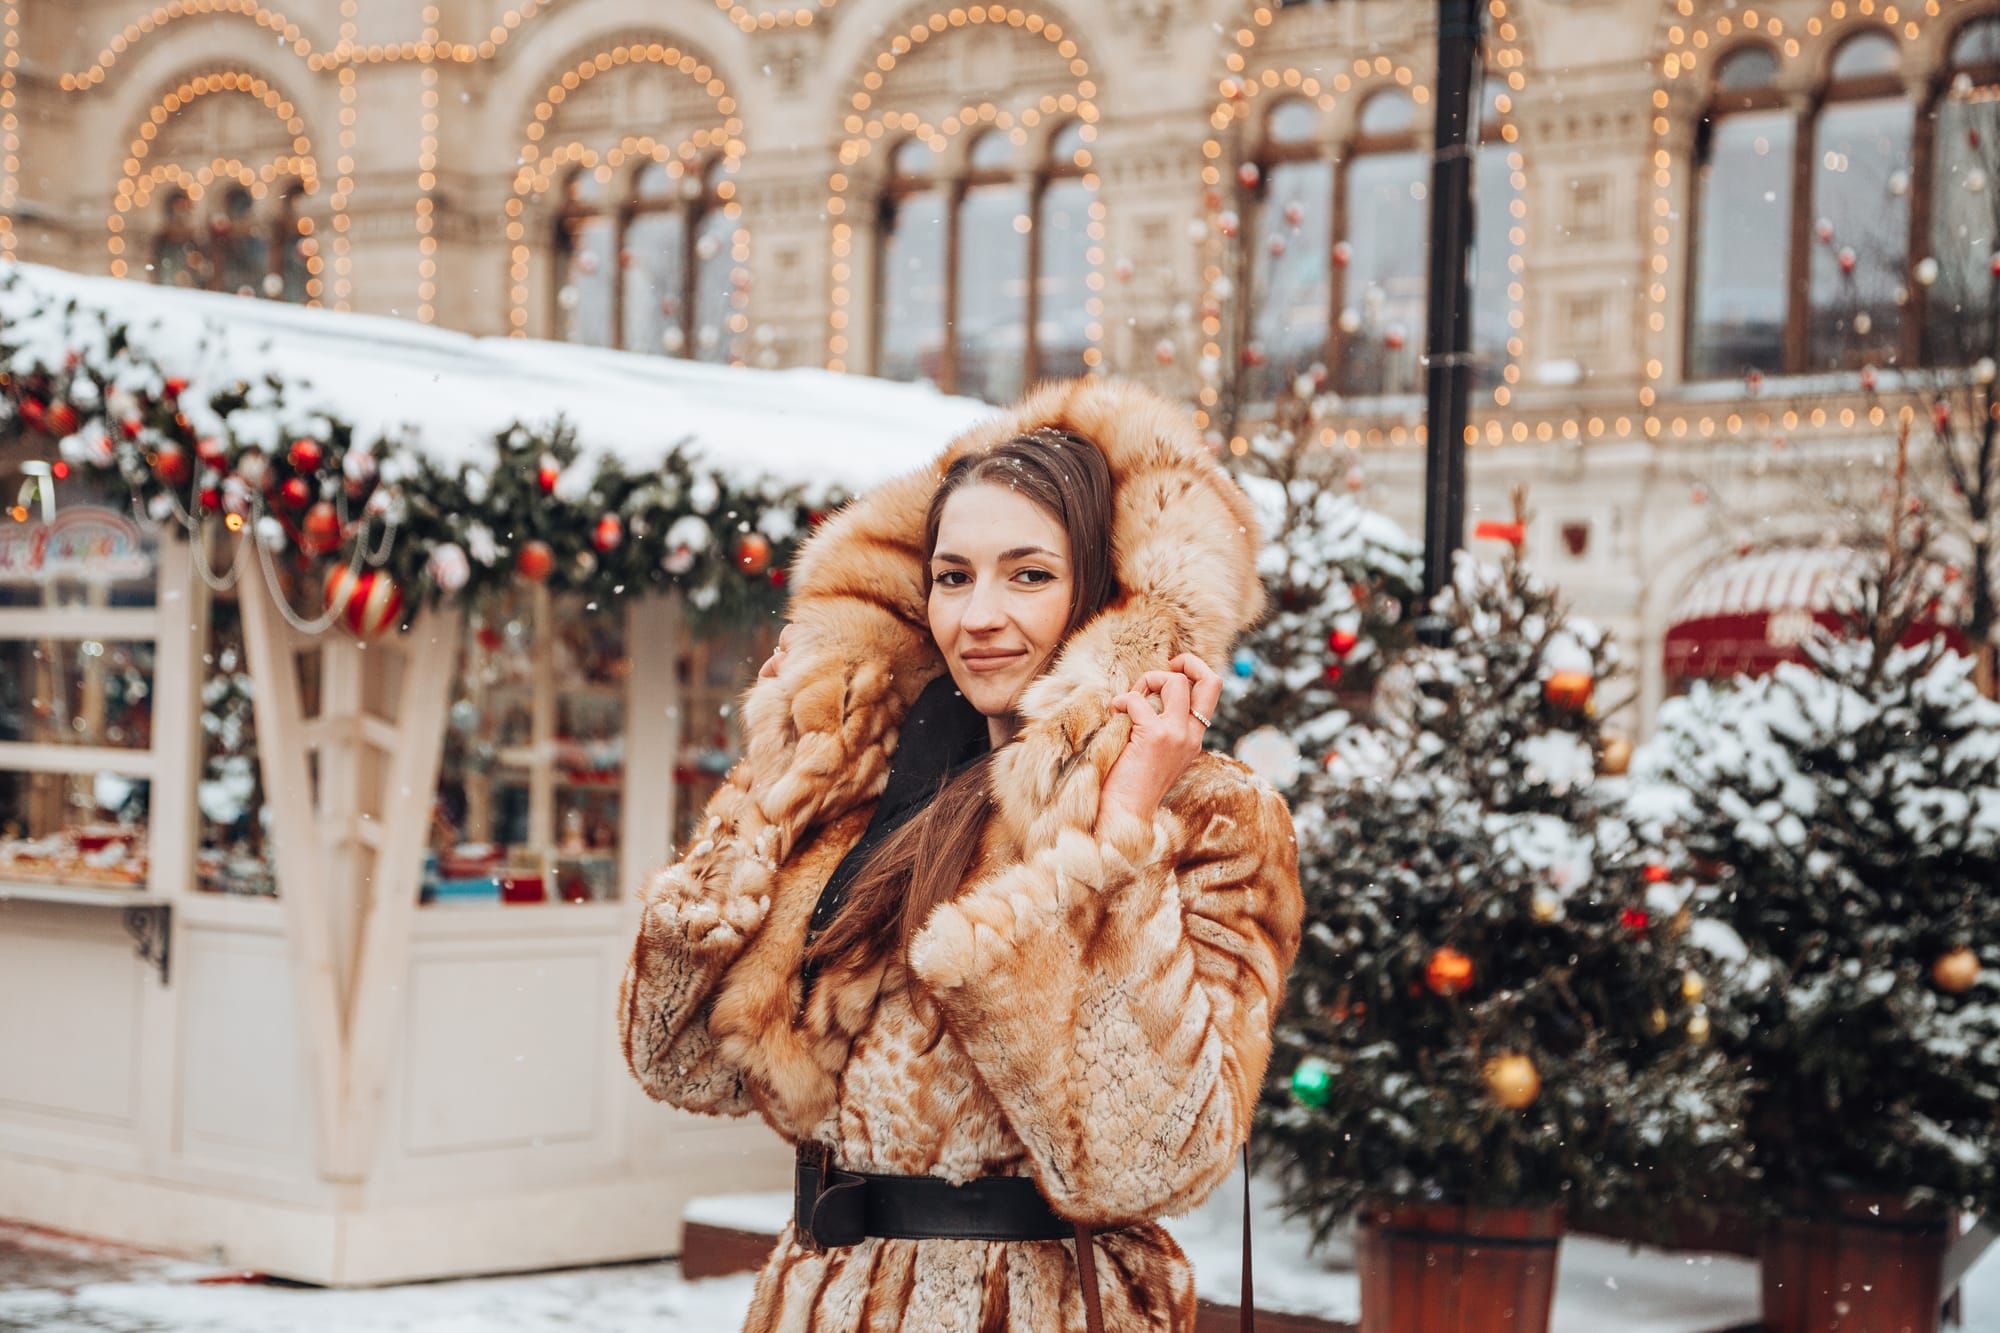 Festive Christmas market: Woman in fur coat poses for a winter photoshoot | Talented photographer captures seasonal photos